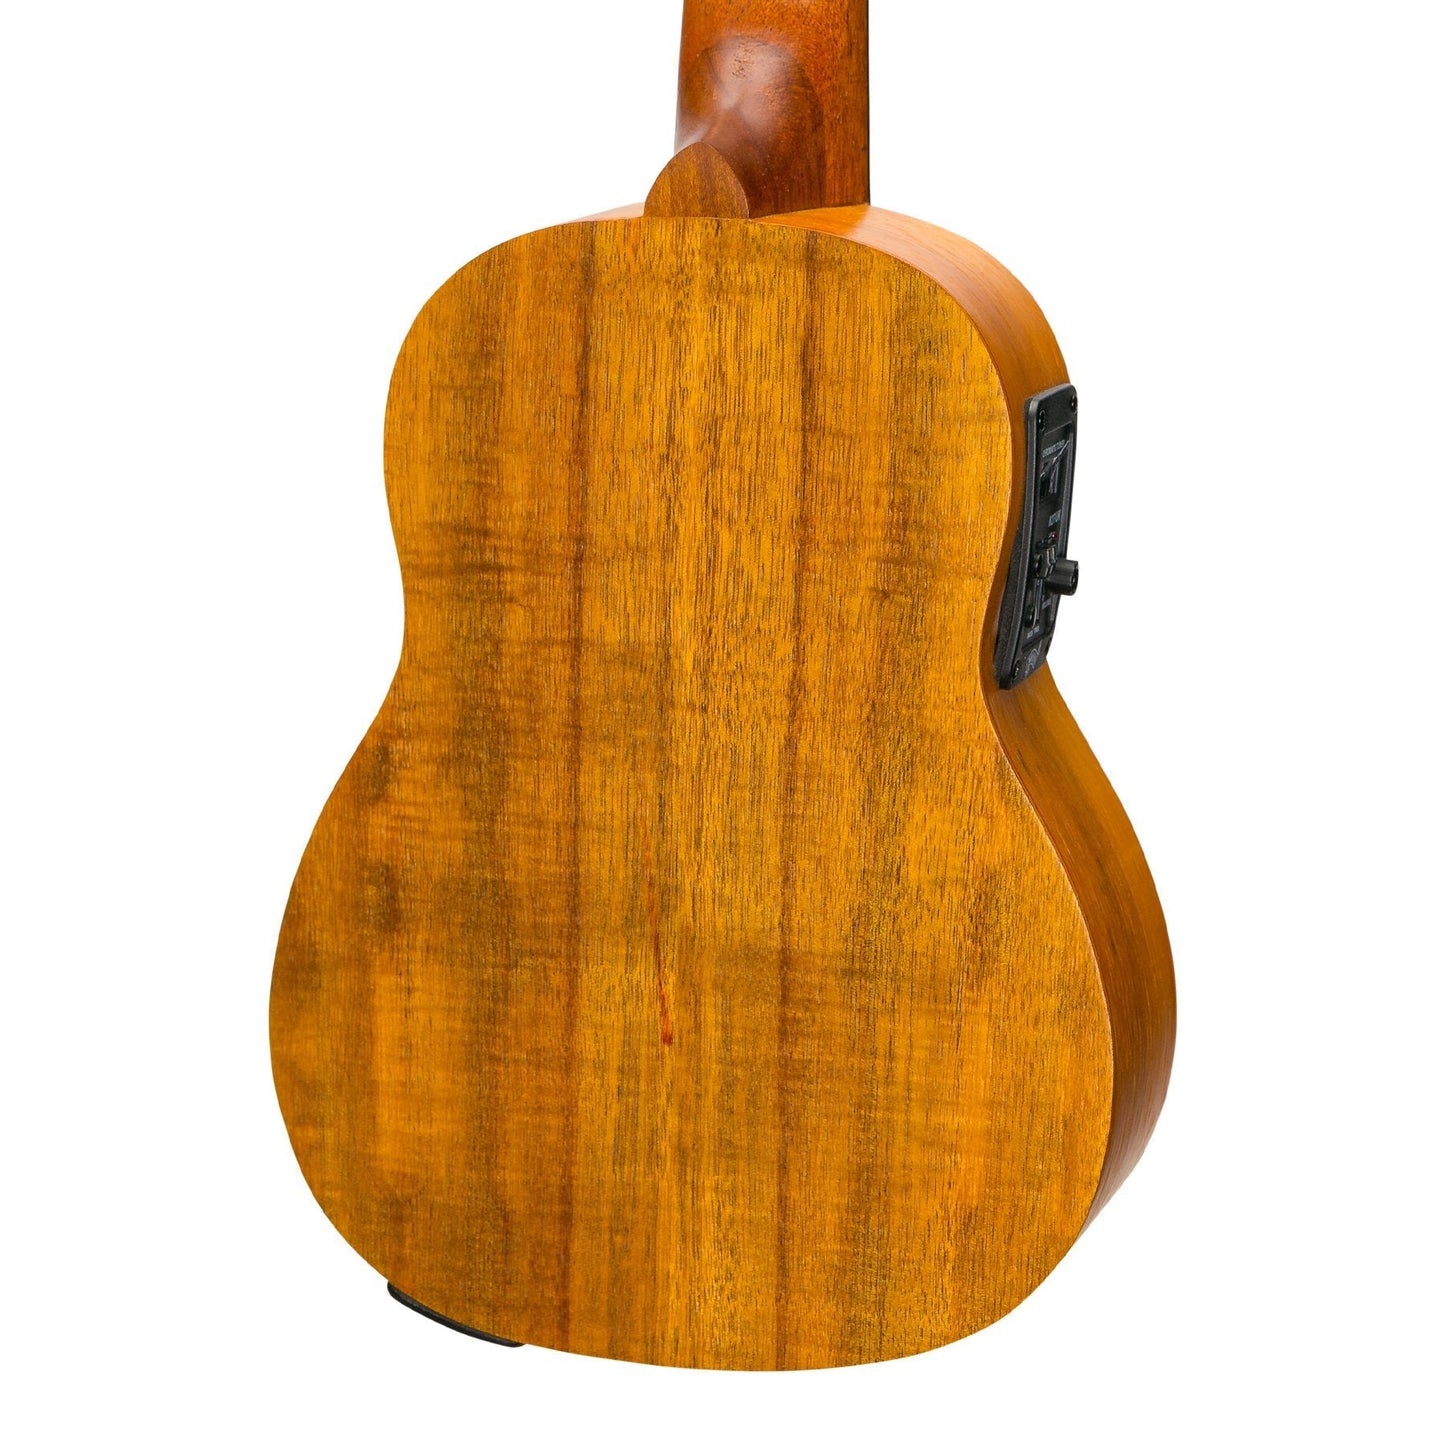 Mojo 'A30 Series' All Acacia Electric Soprano Ukulele with Built-in Tuner (Natural Satin)